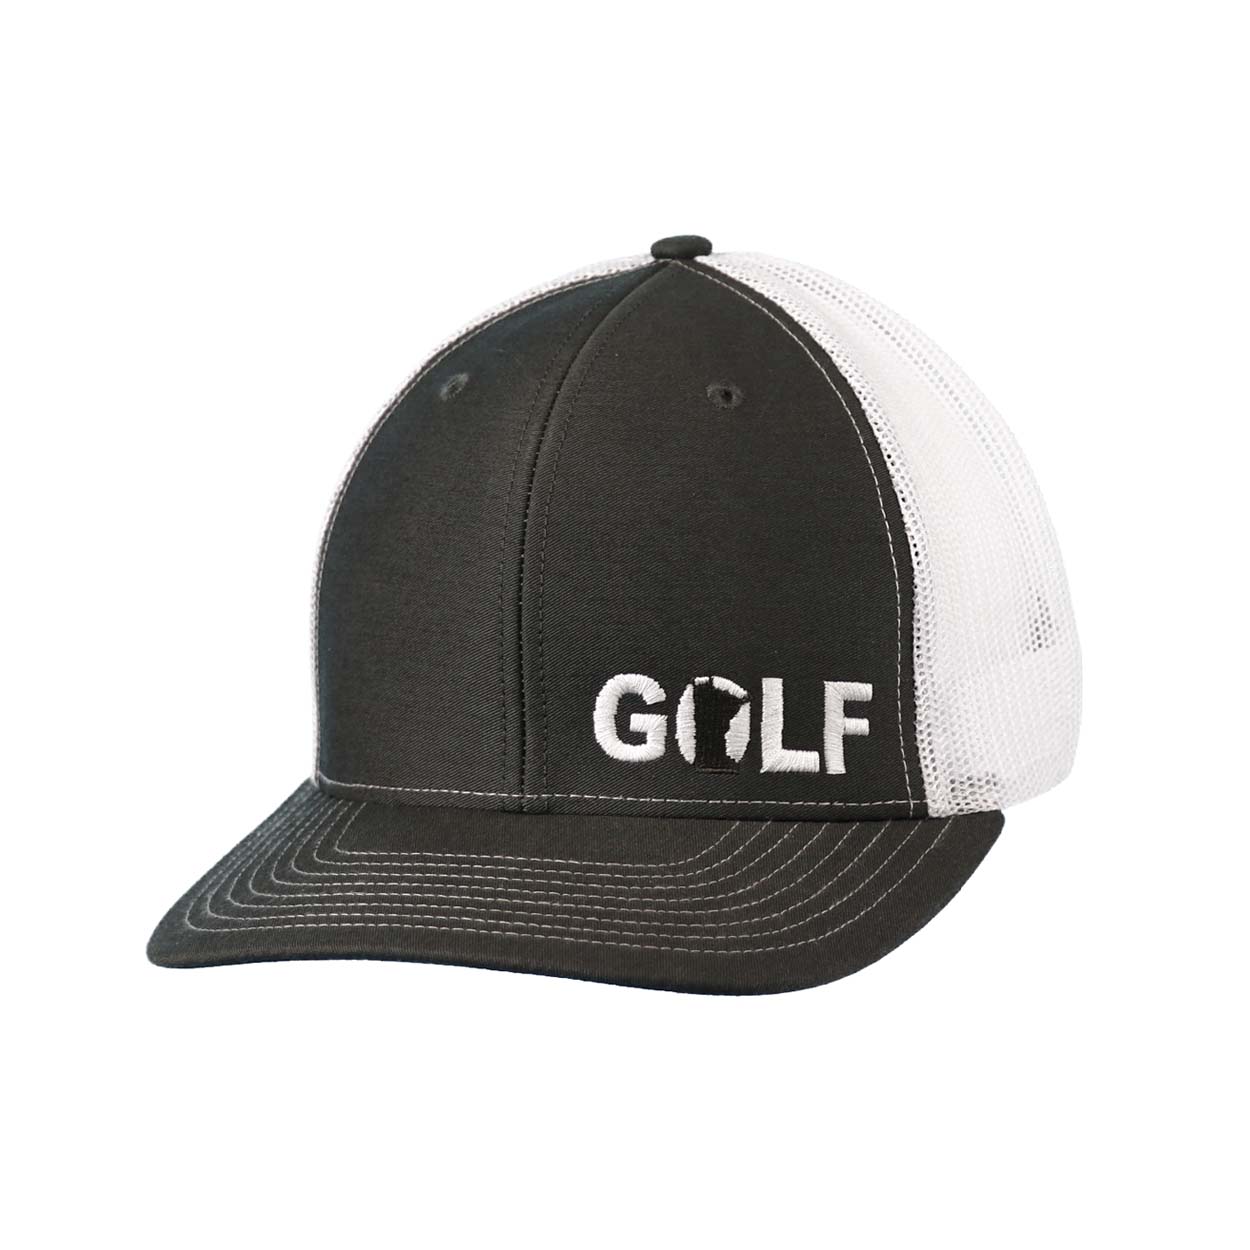 Golf Minnesota Night Out Embroidered Snapback Trucker Hat Gray/White